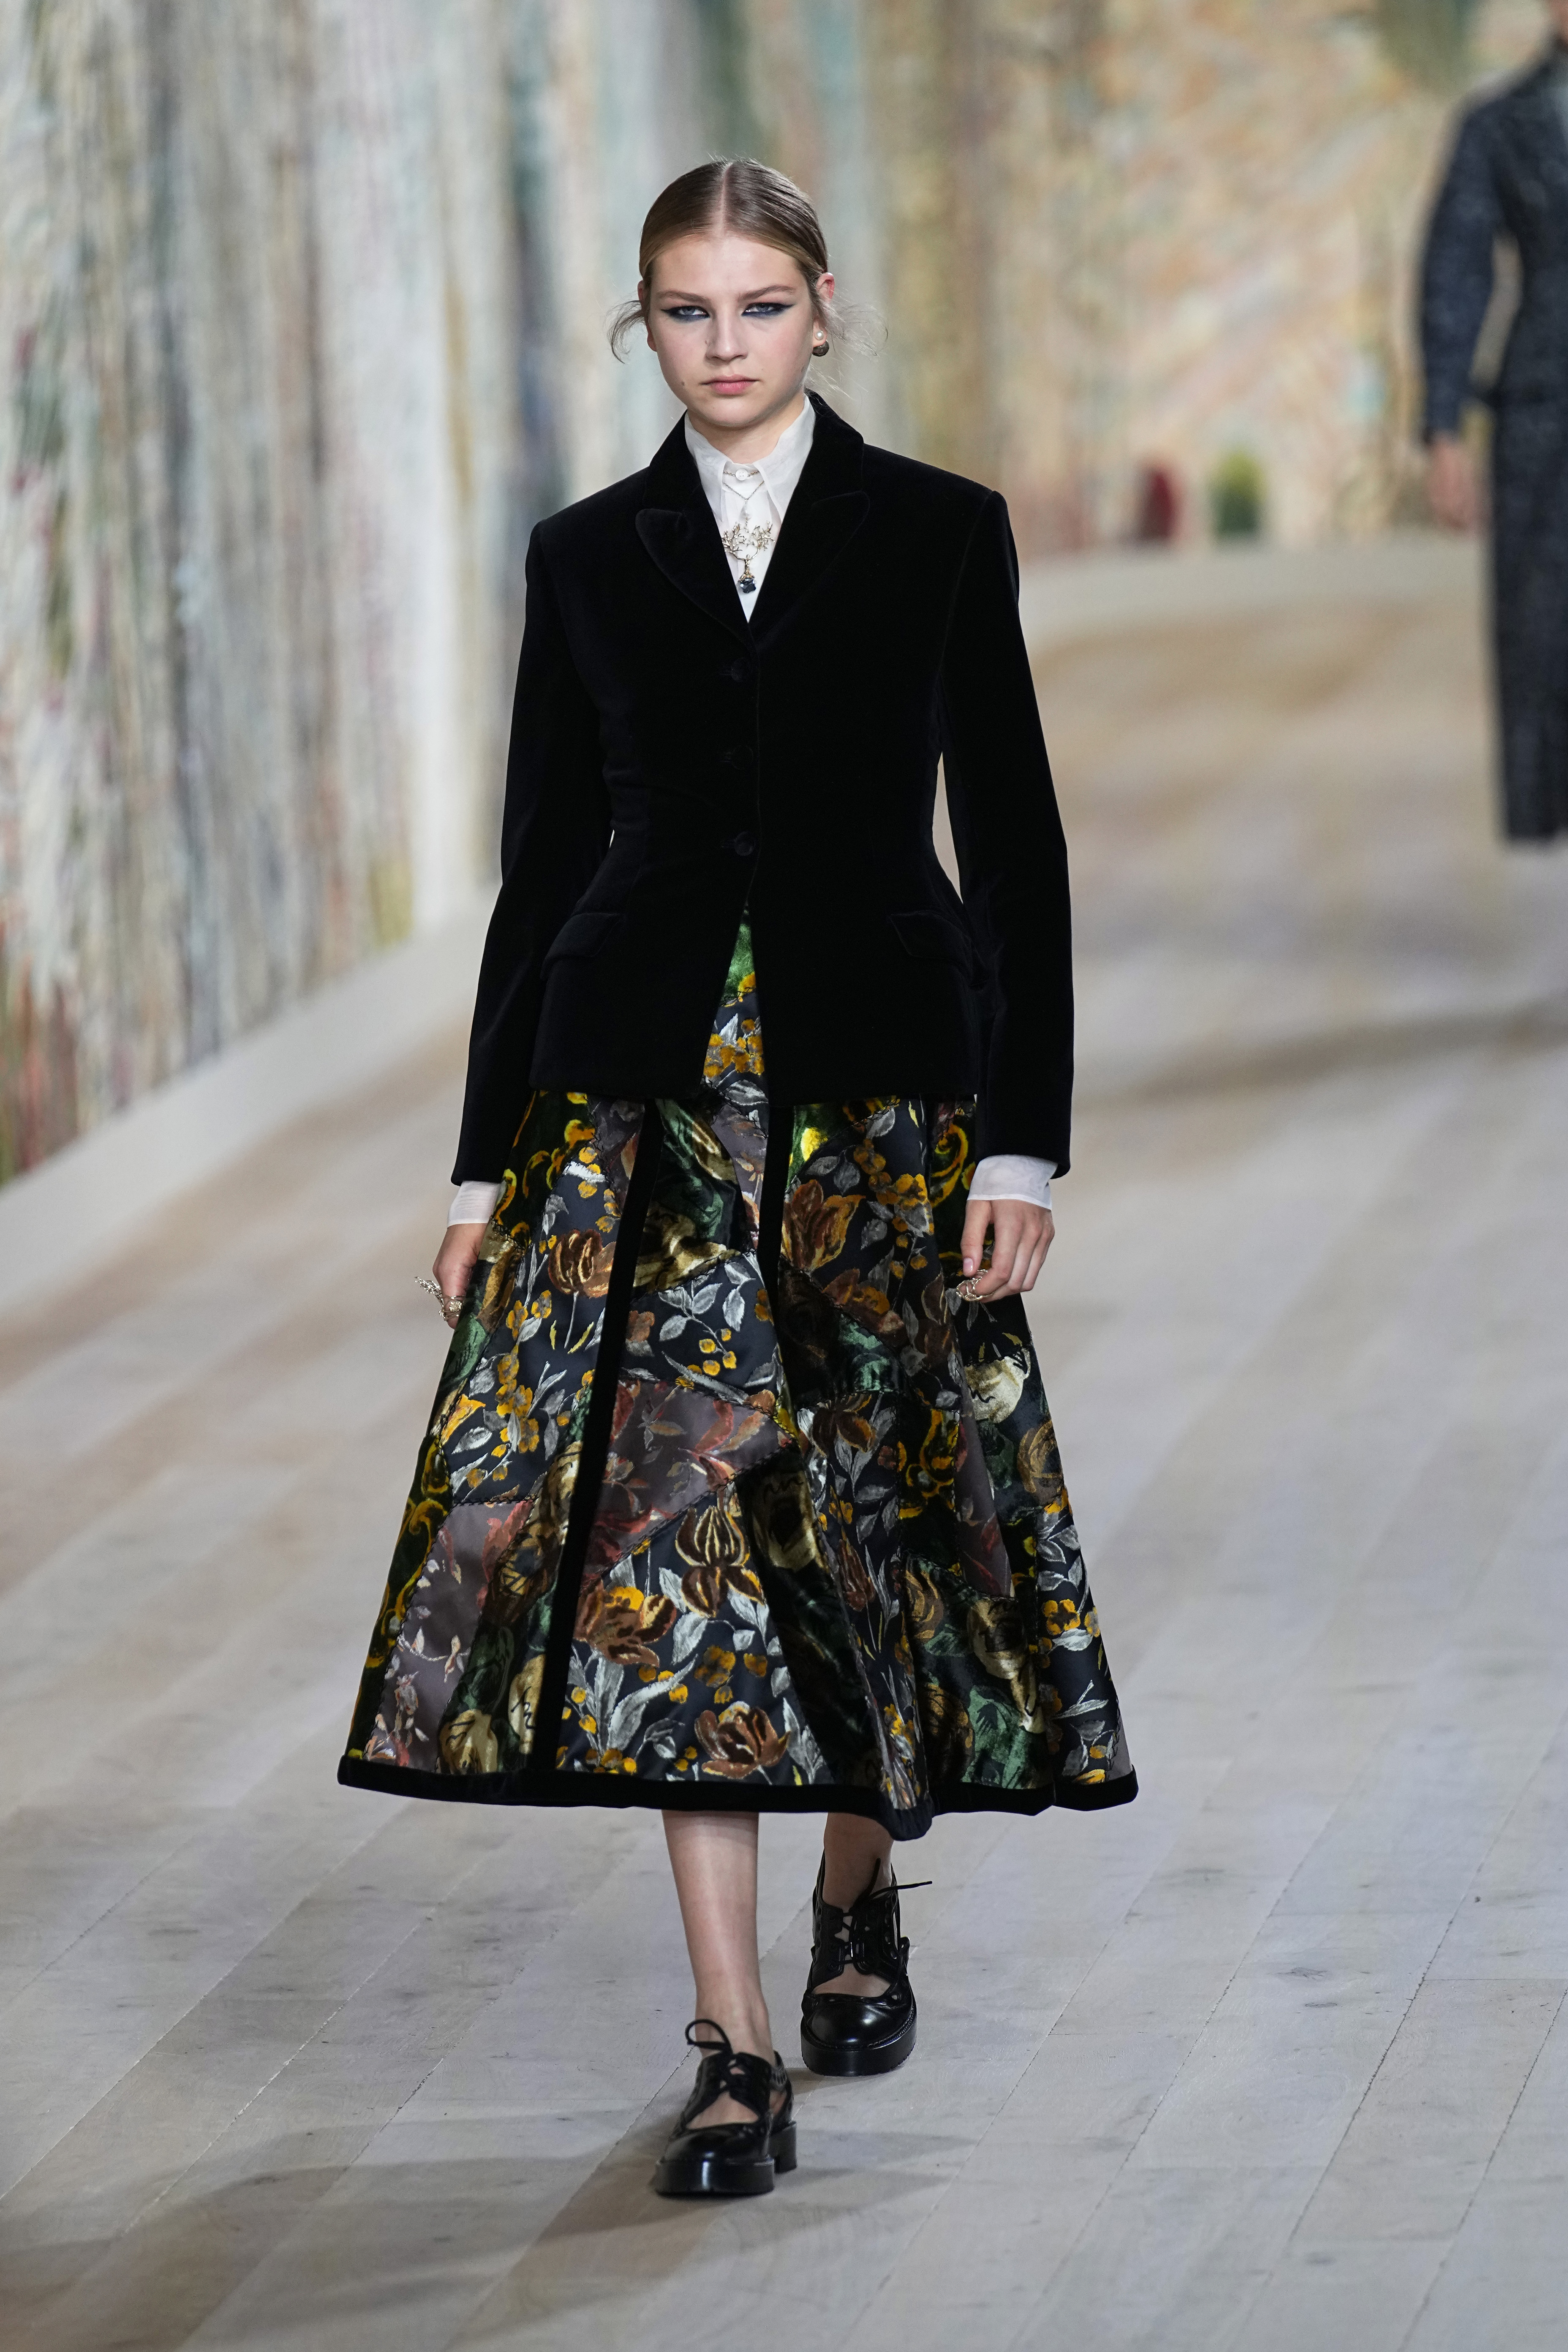 Dior Celebrates Return to In-person Shows With a Festival of Tweed – WWD